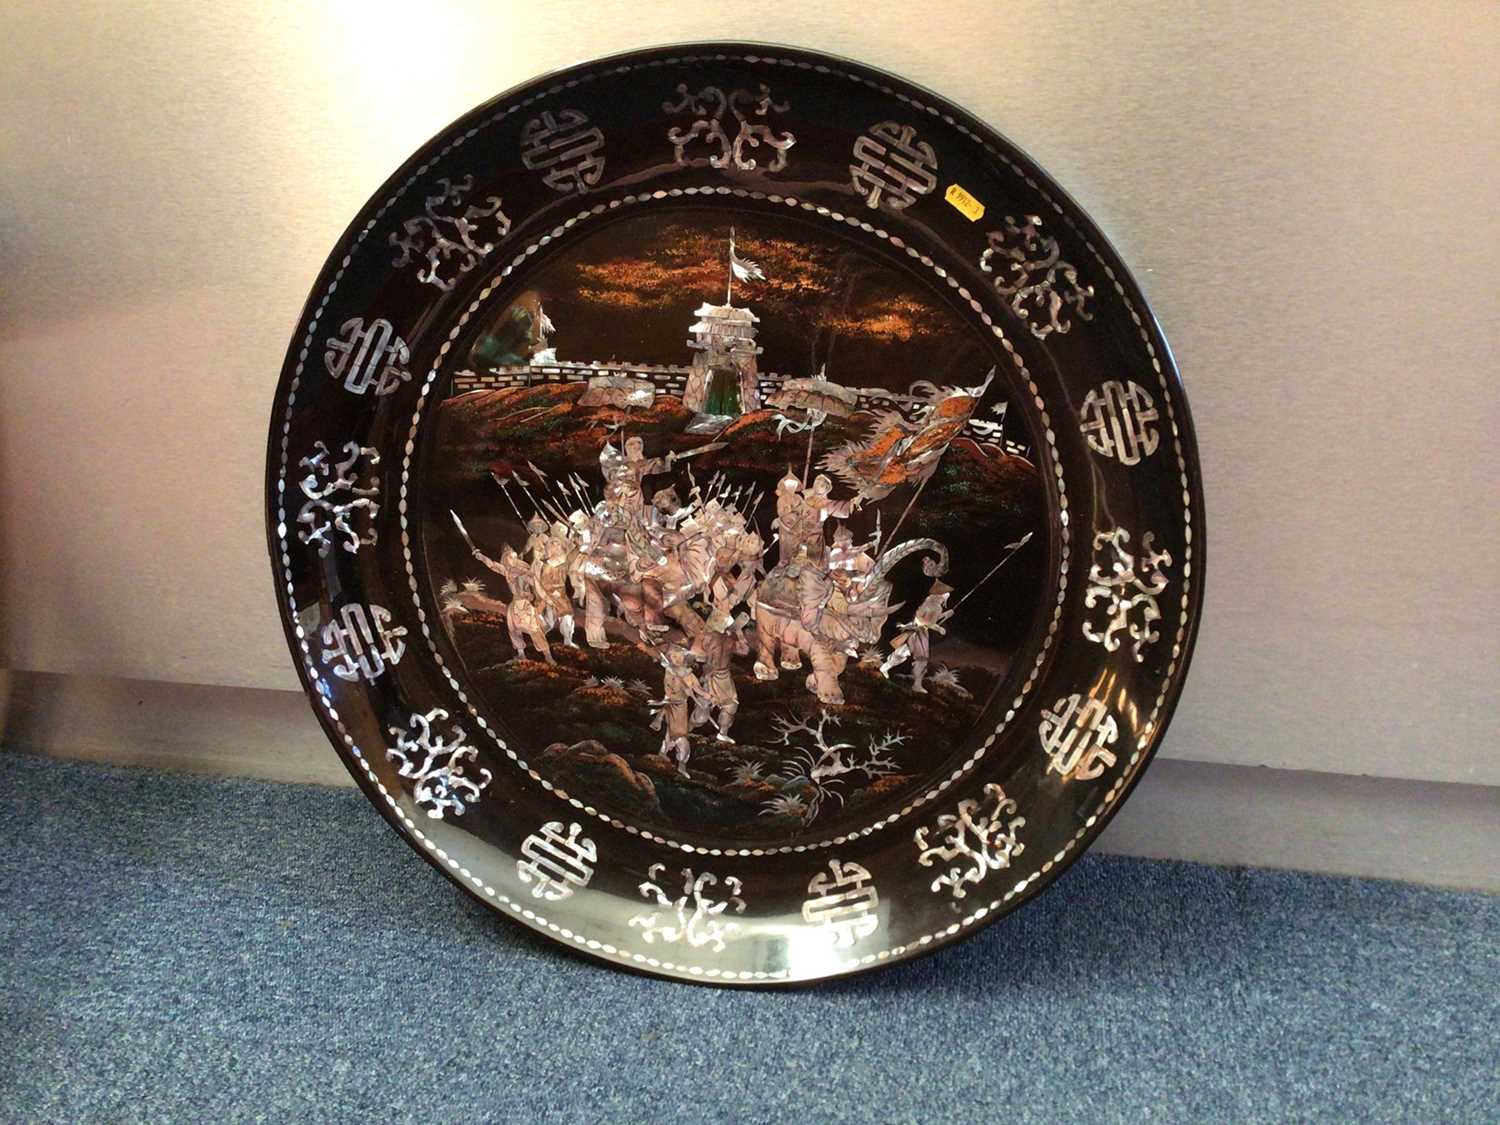 Lot 90 - Large Eastern mother of pearl inlaid dish decorated with warriors, with character marks around the edge, together with a similar box, possibly Chinese